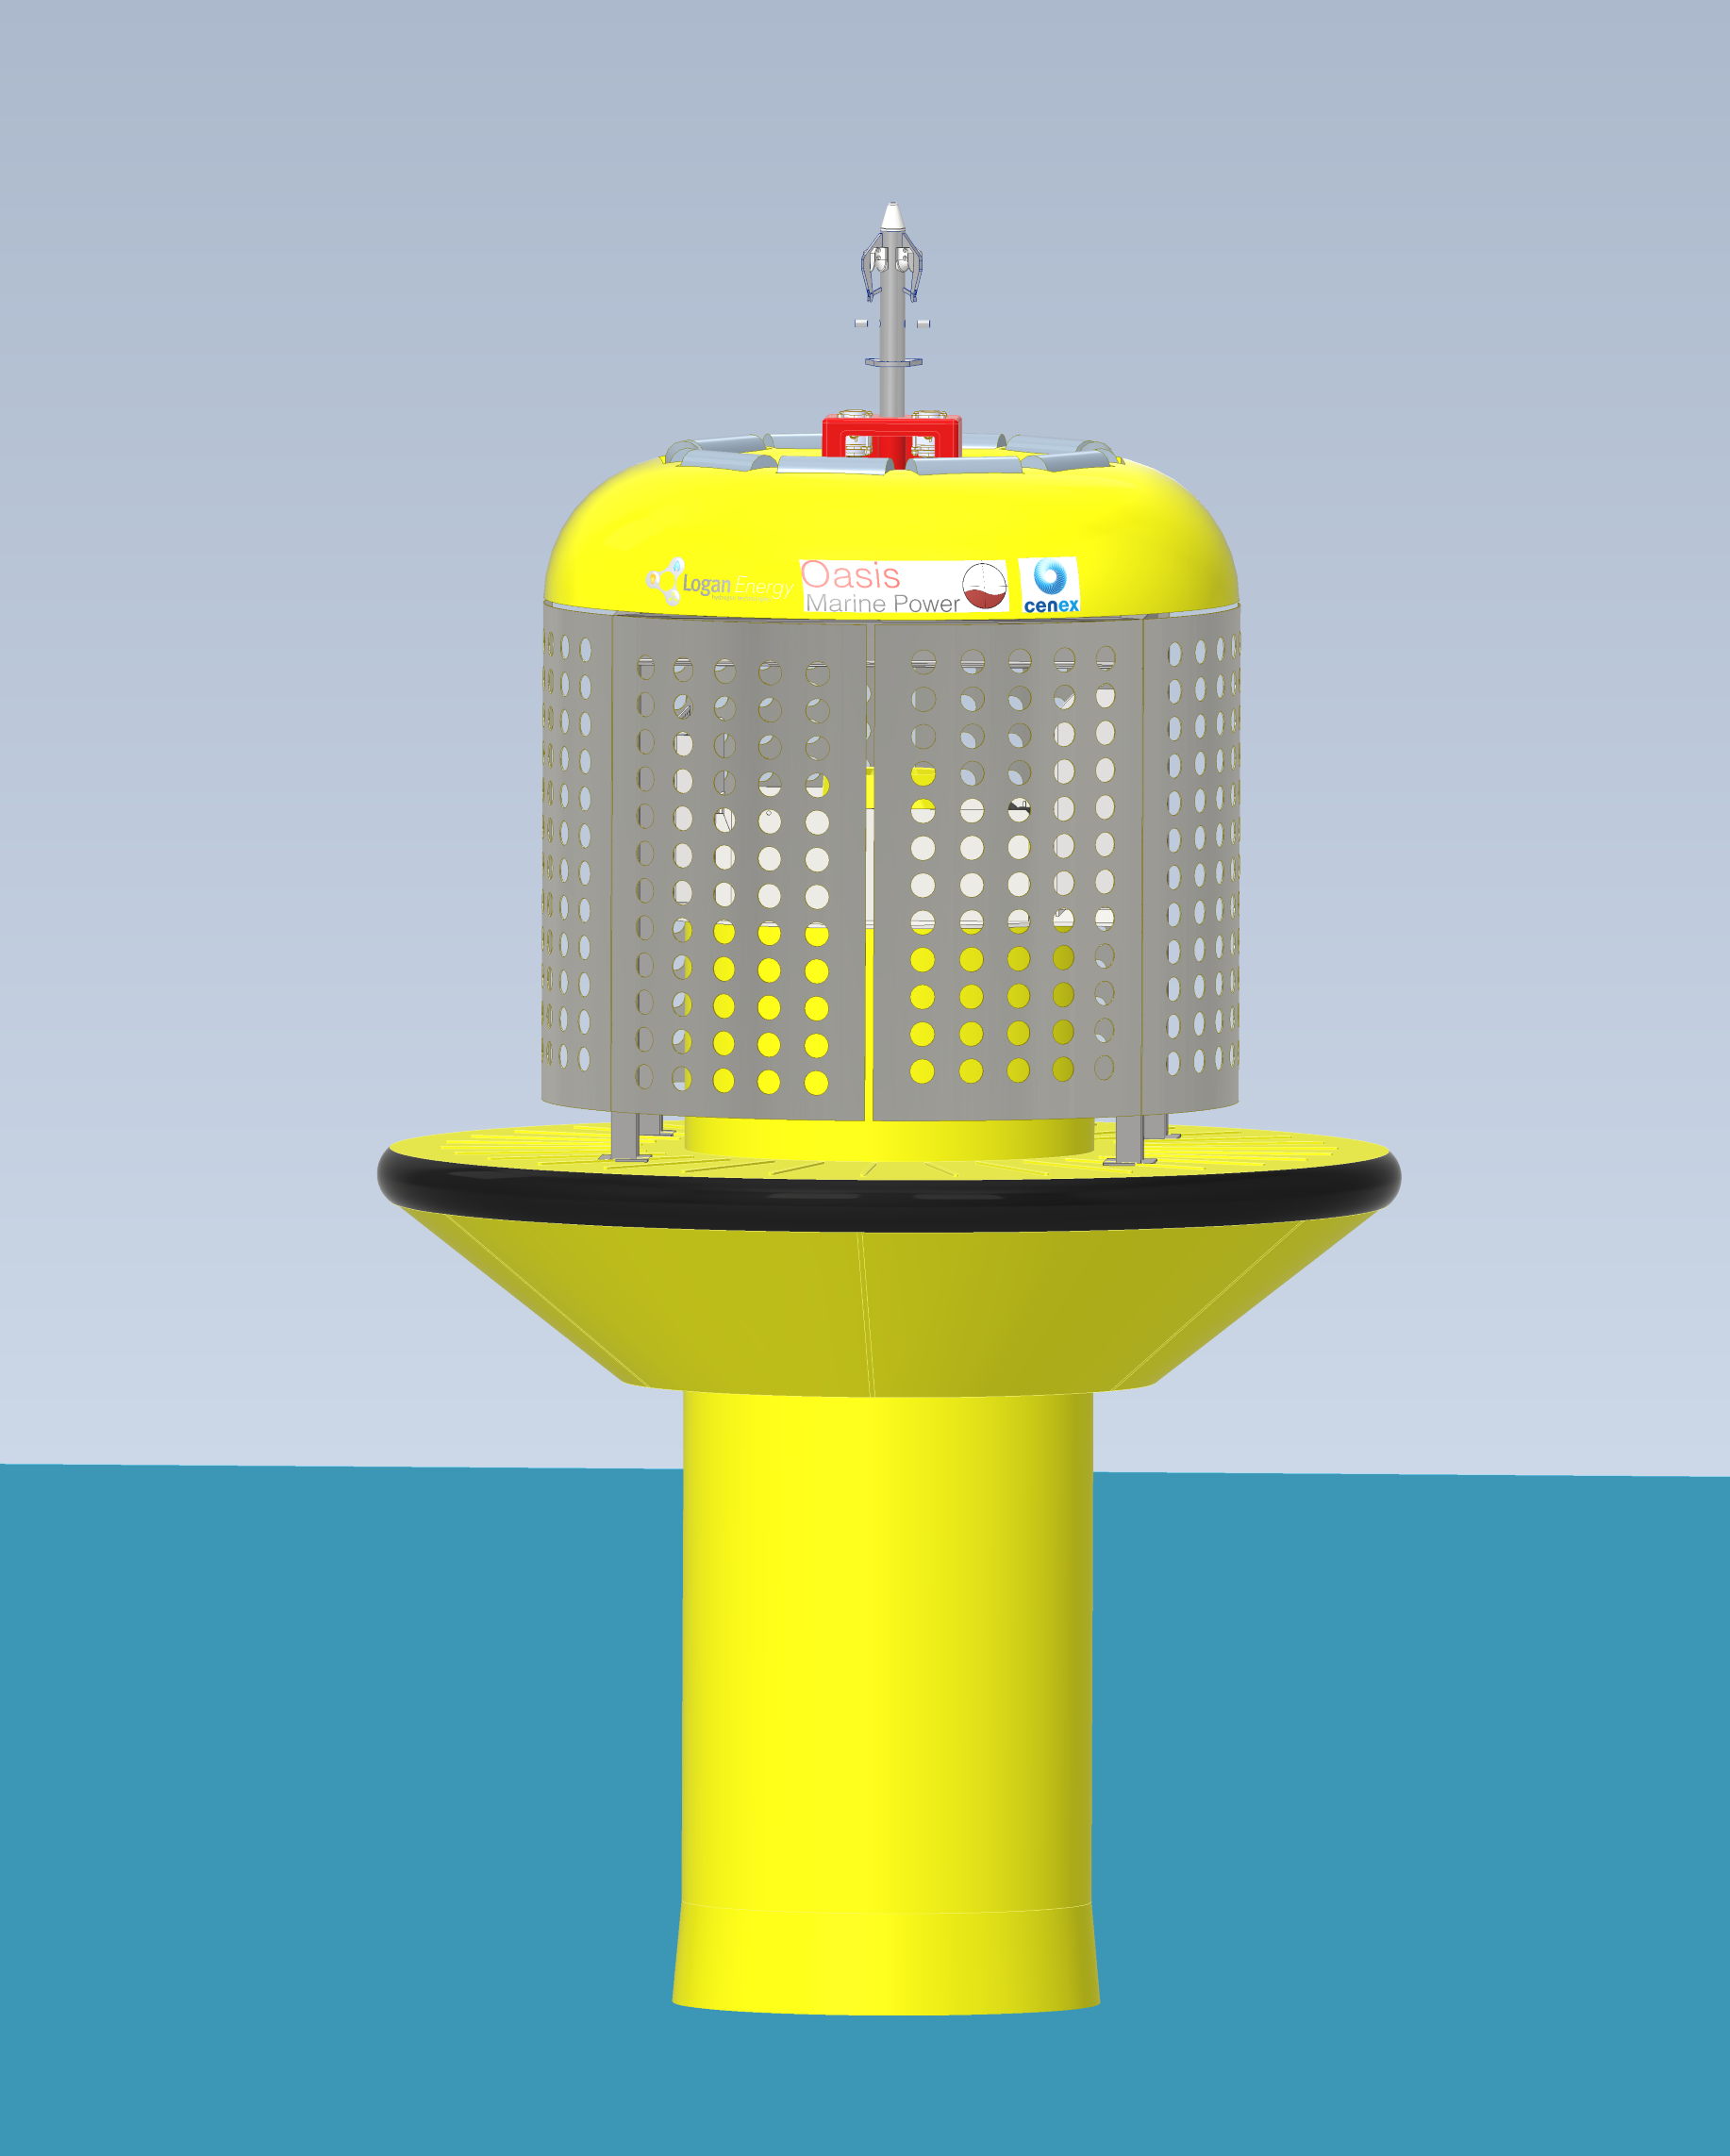 A graphic design of a large, yellow industrial buoy protruding from the sea